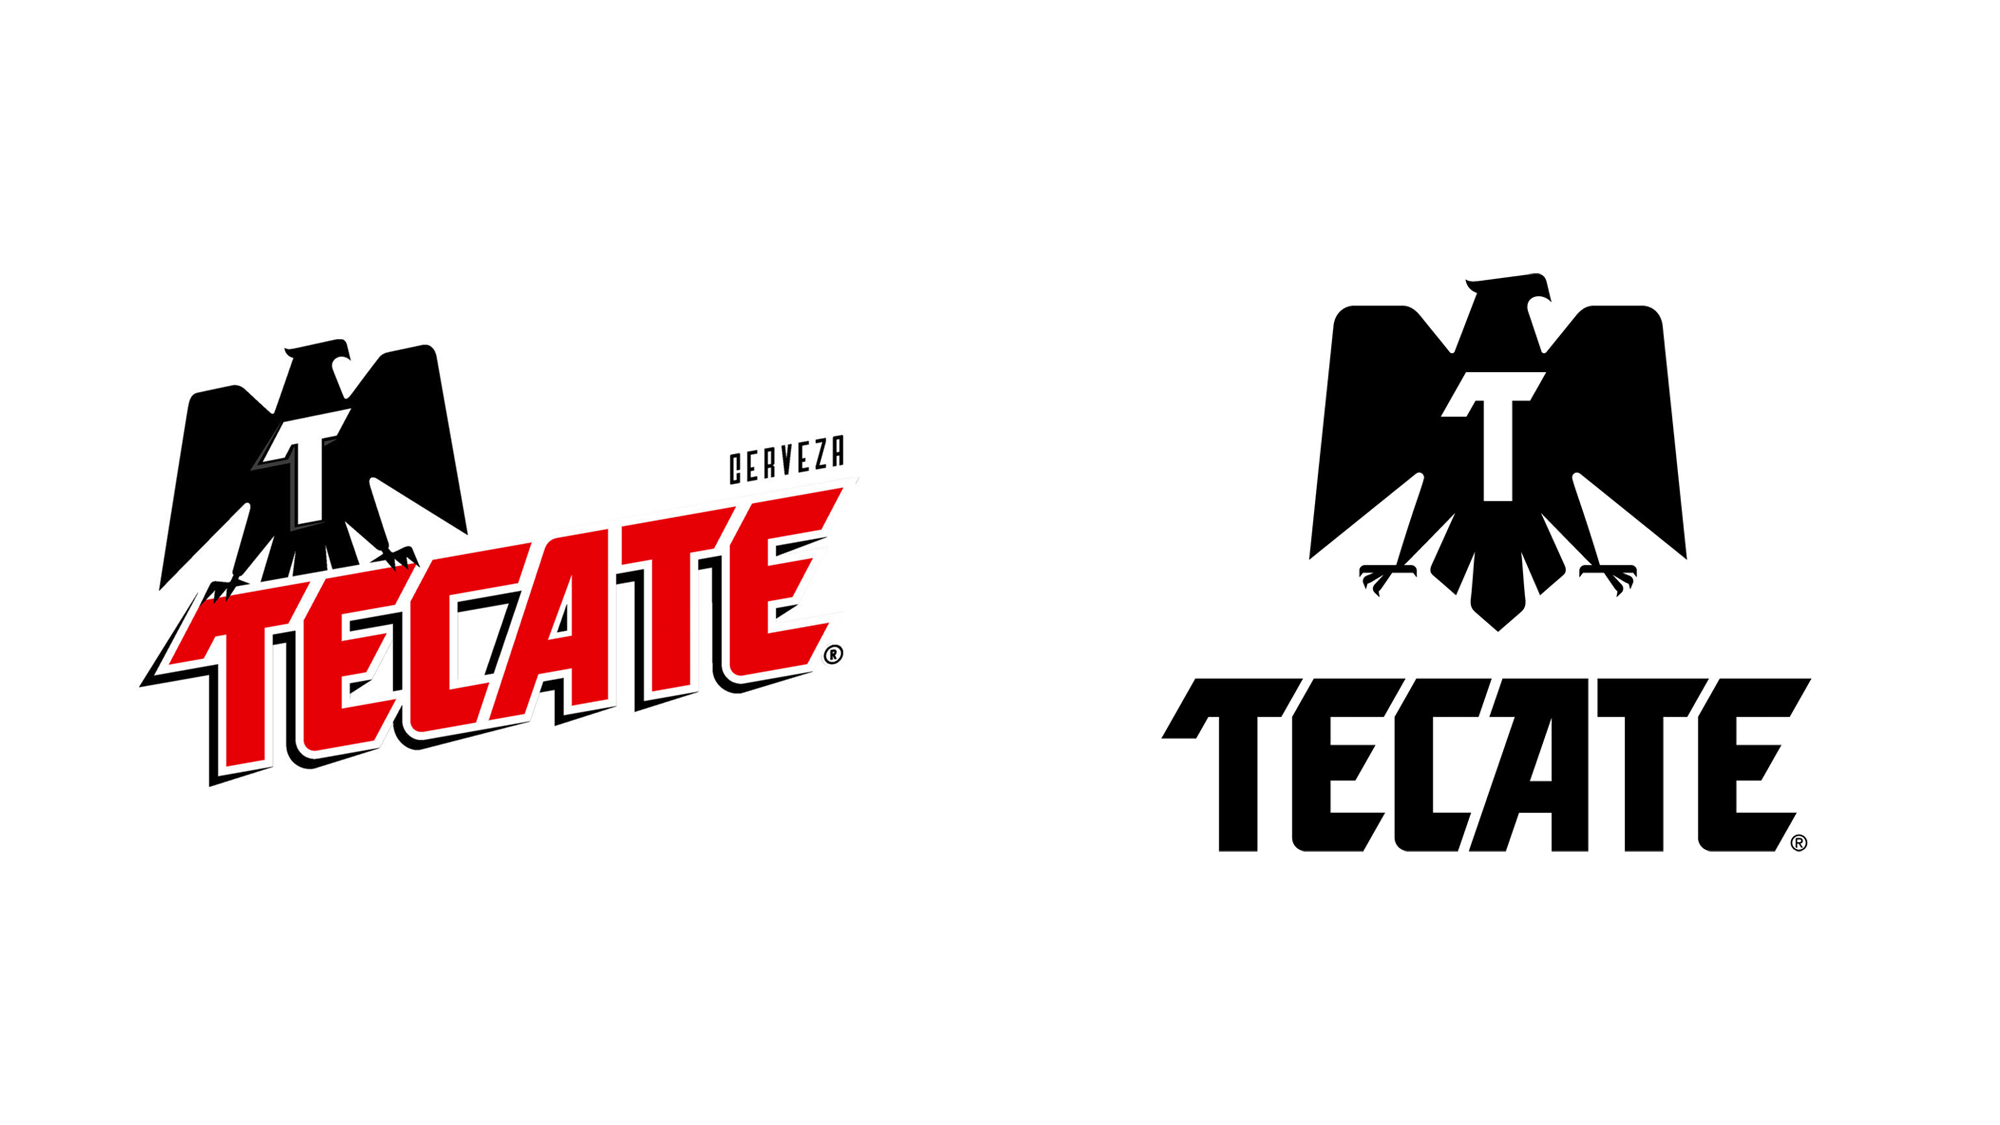 Brand New: New Logo, Identity, and Packaging for Tecate by Elmwood